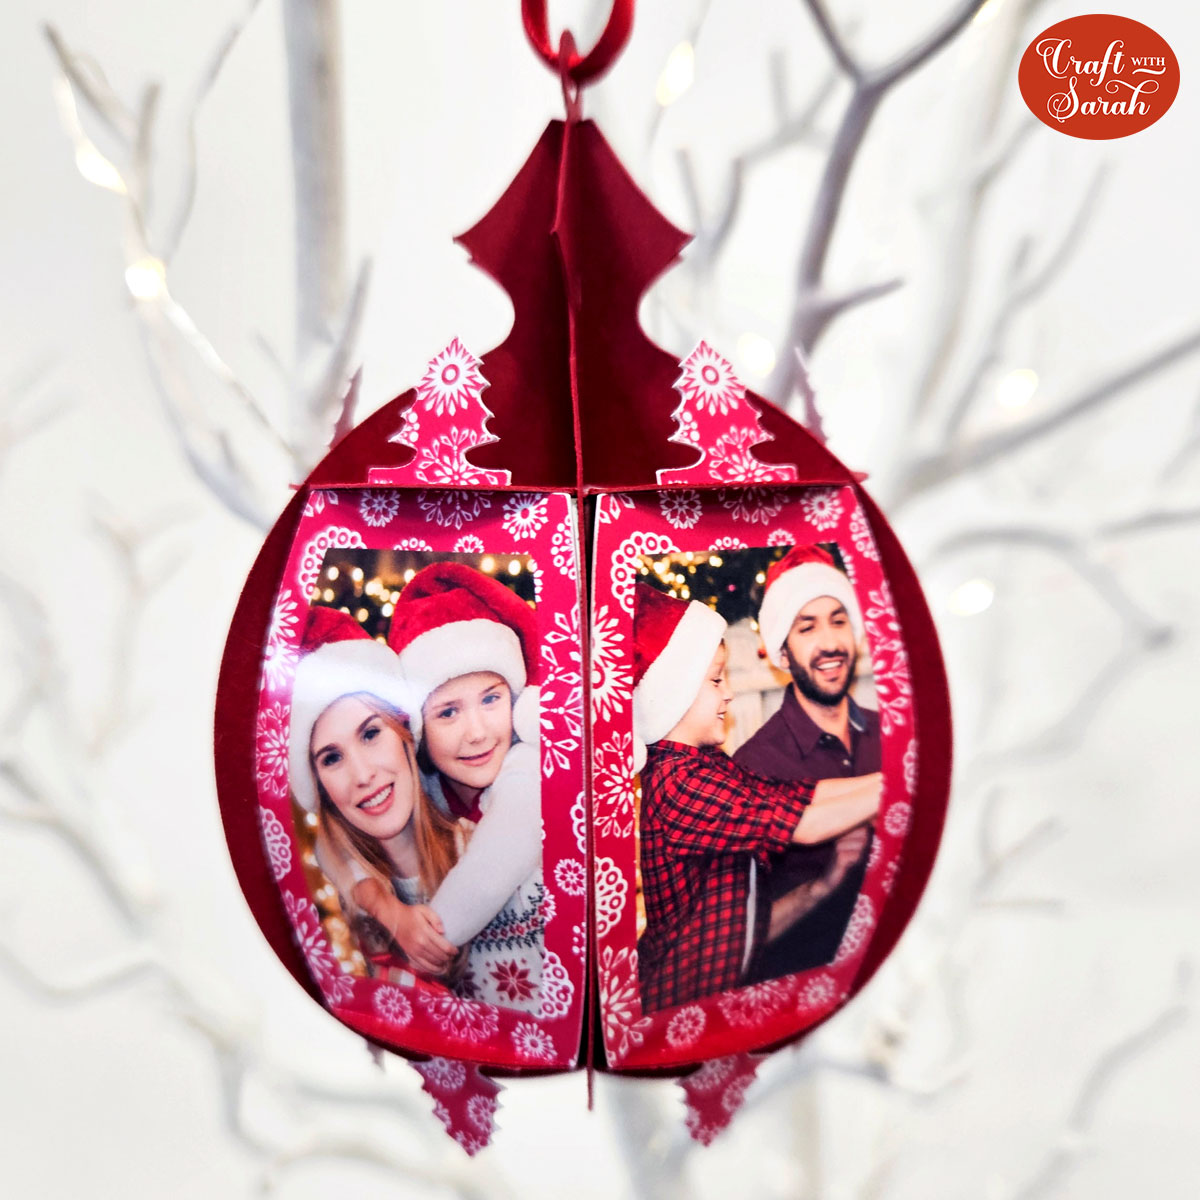 Custom Family Photo Ornaments with Print Then Cut